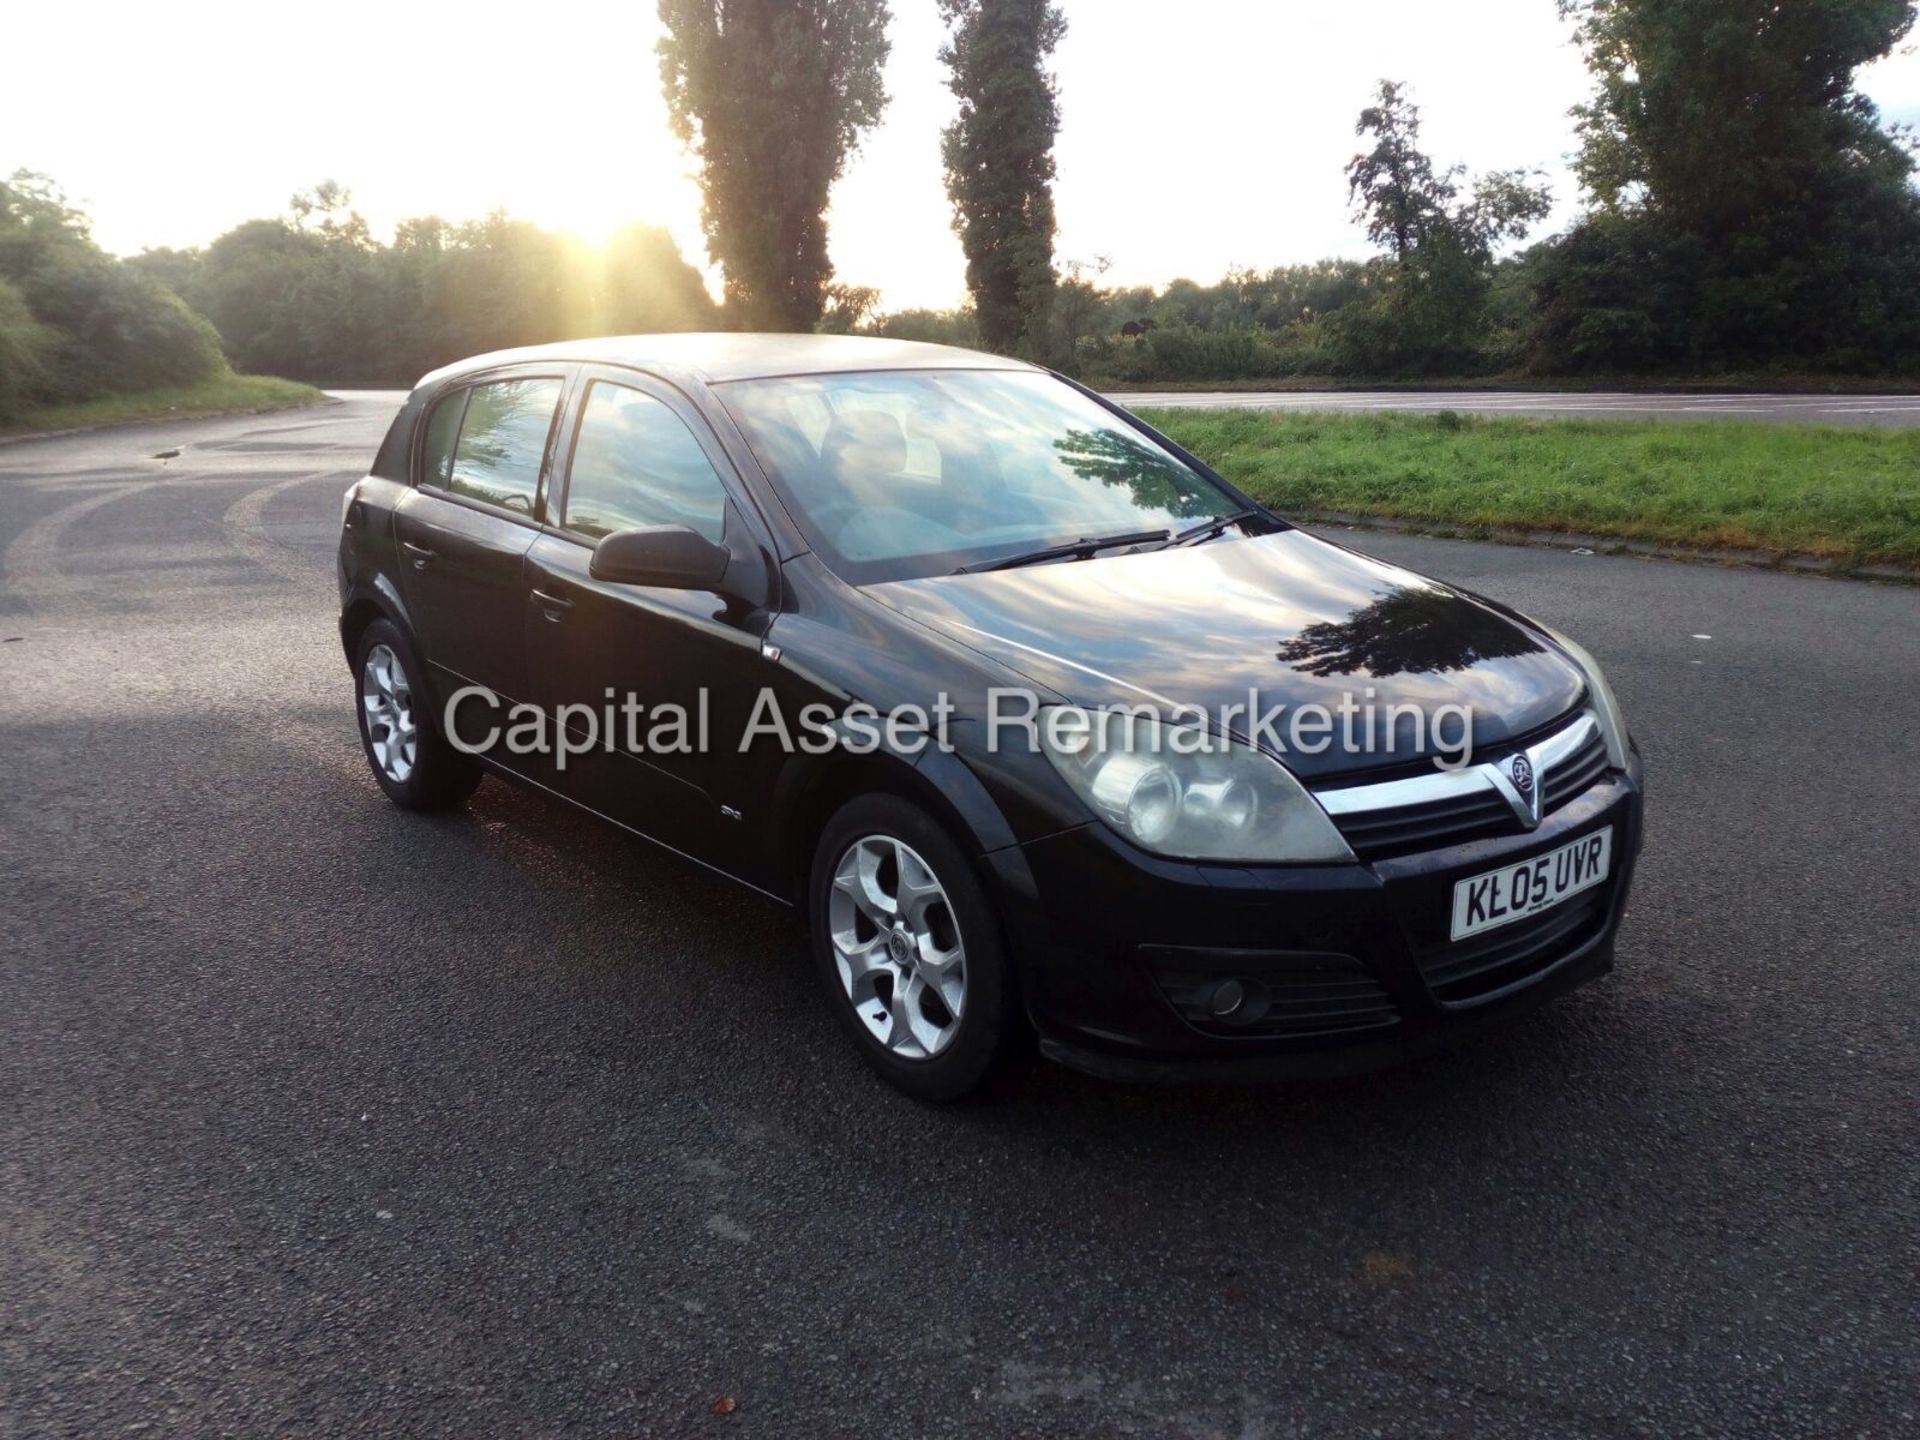 On Sale VAUXHALL ASTRA 1.6 "SXI - BLACK EDITION" HATCHBACK - AIR CON - ELEC PACK - ALLOYS - NO VAT